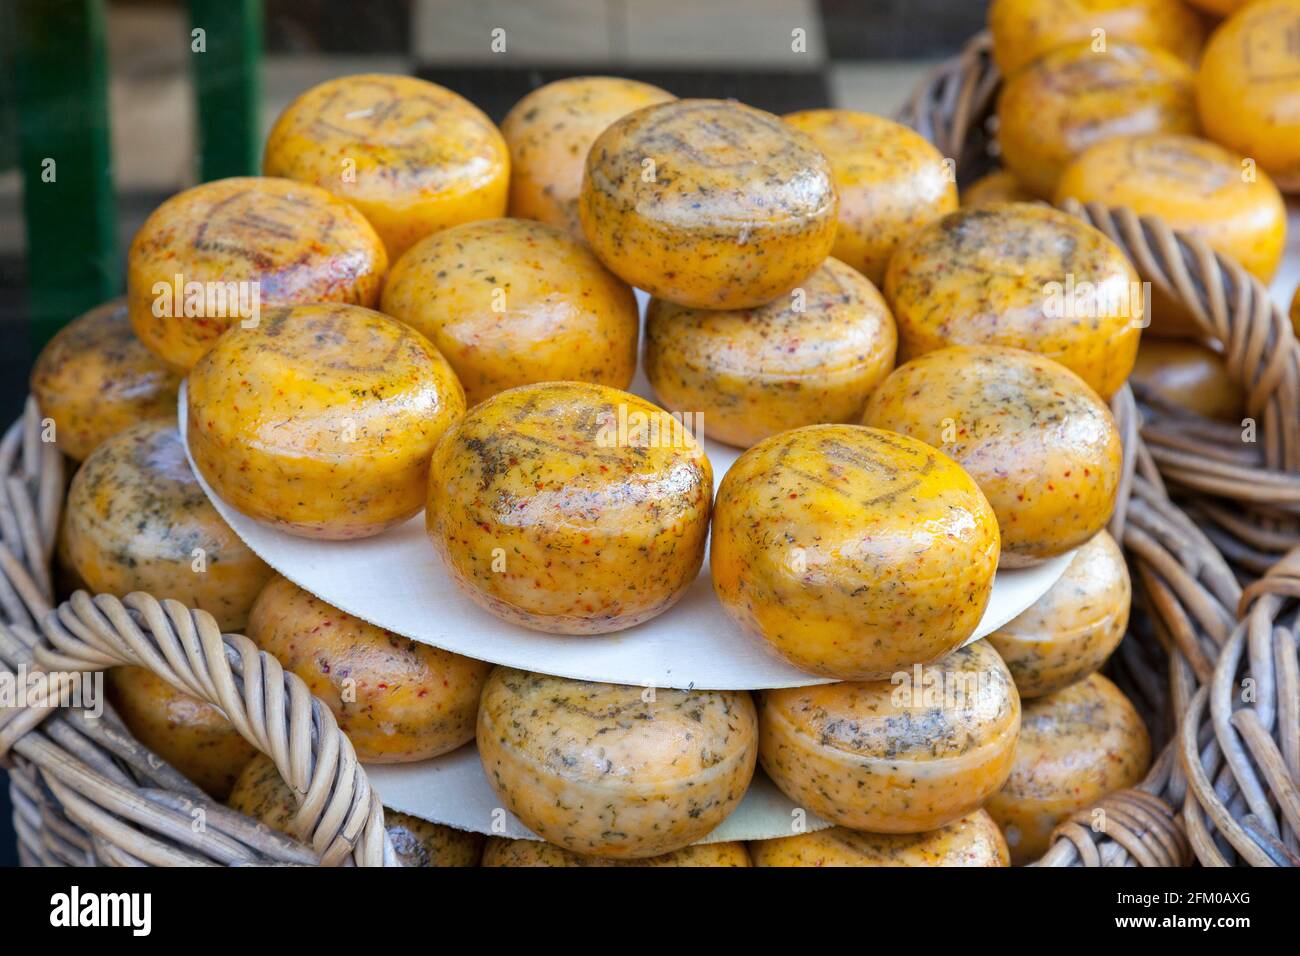 Round shaped smoked Gouda hard cheese in straw basket, Amsterdam, North Holland, The Netherlands Stock Photo